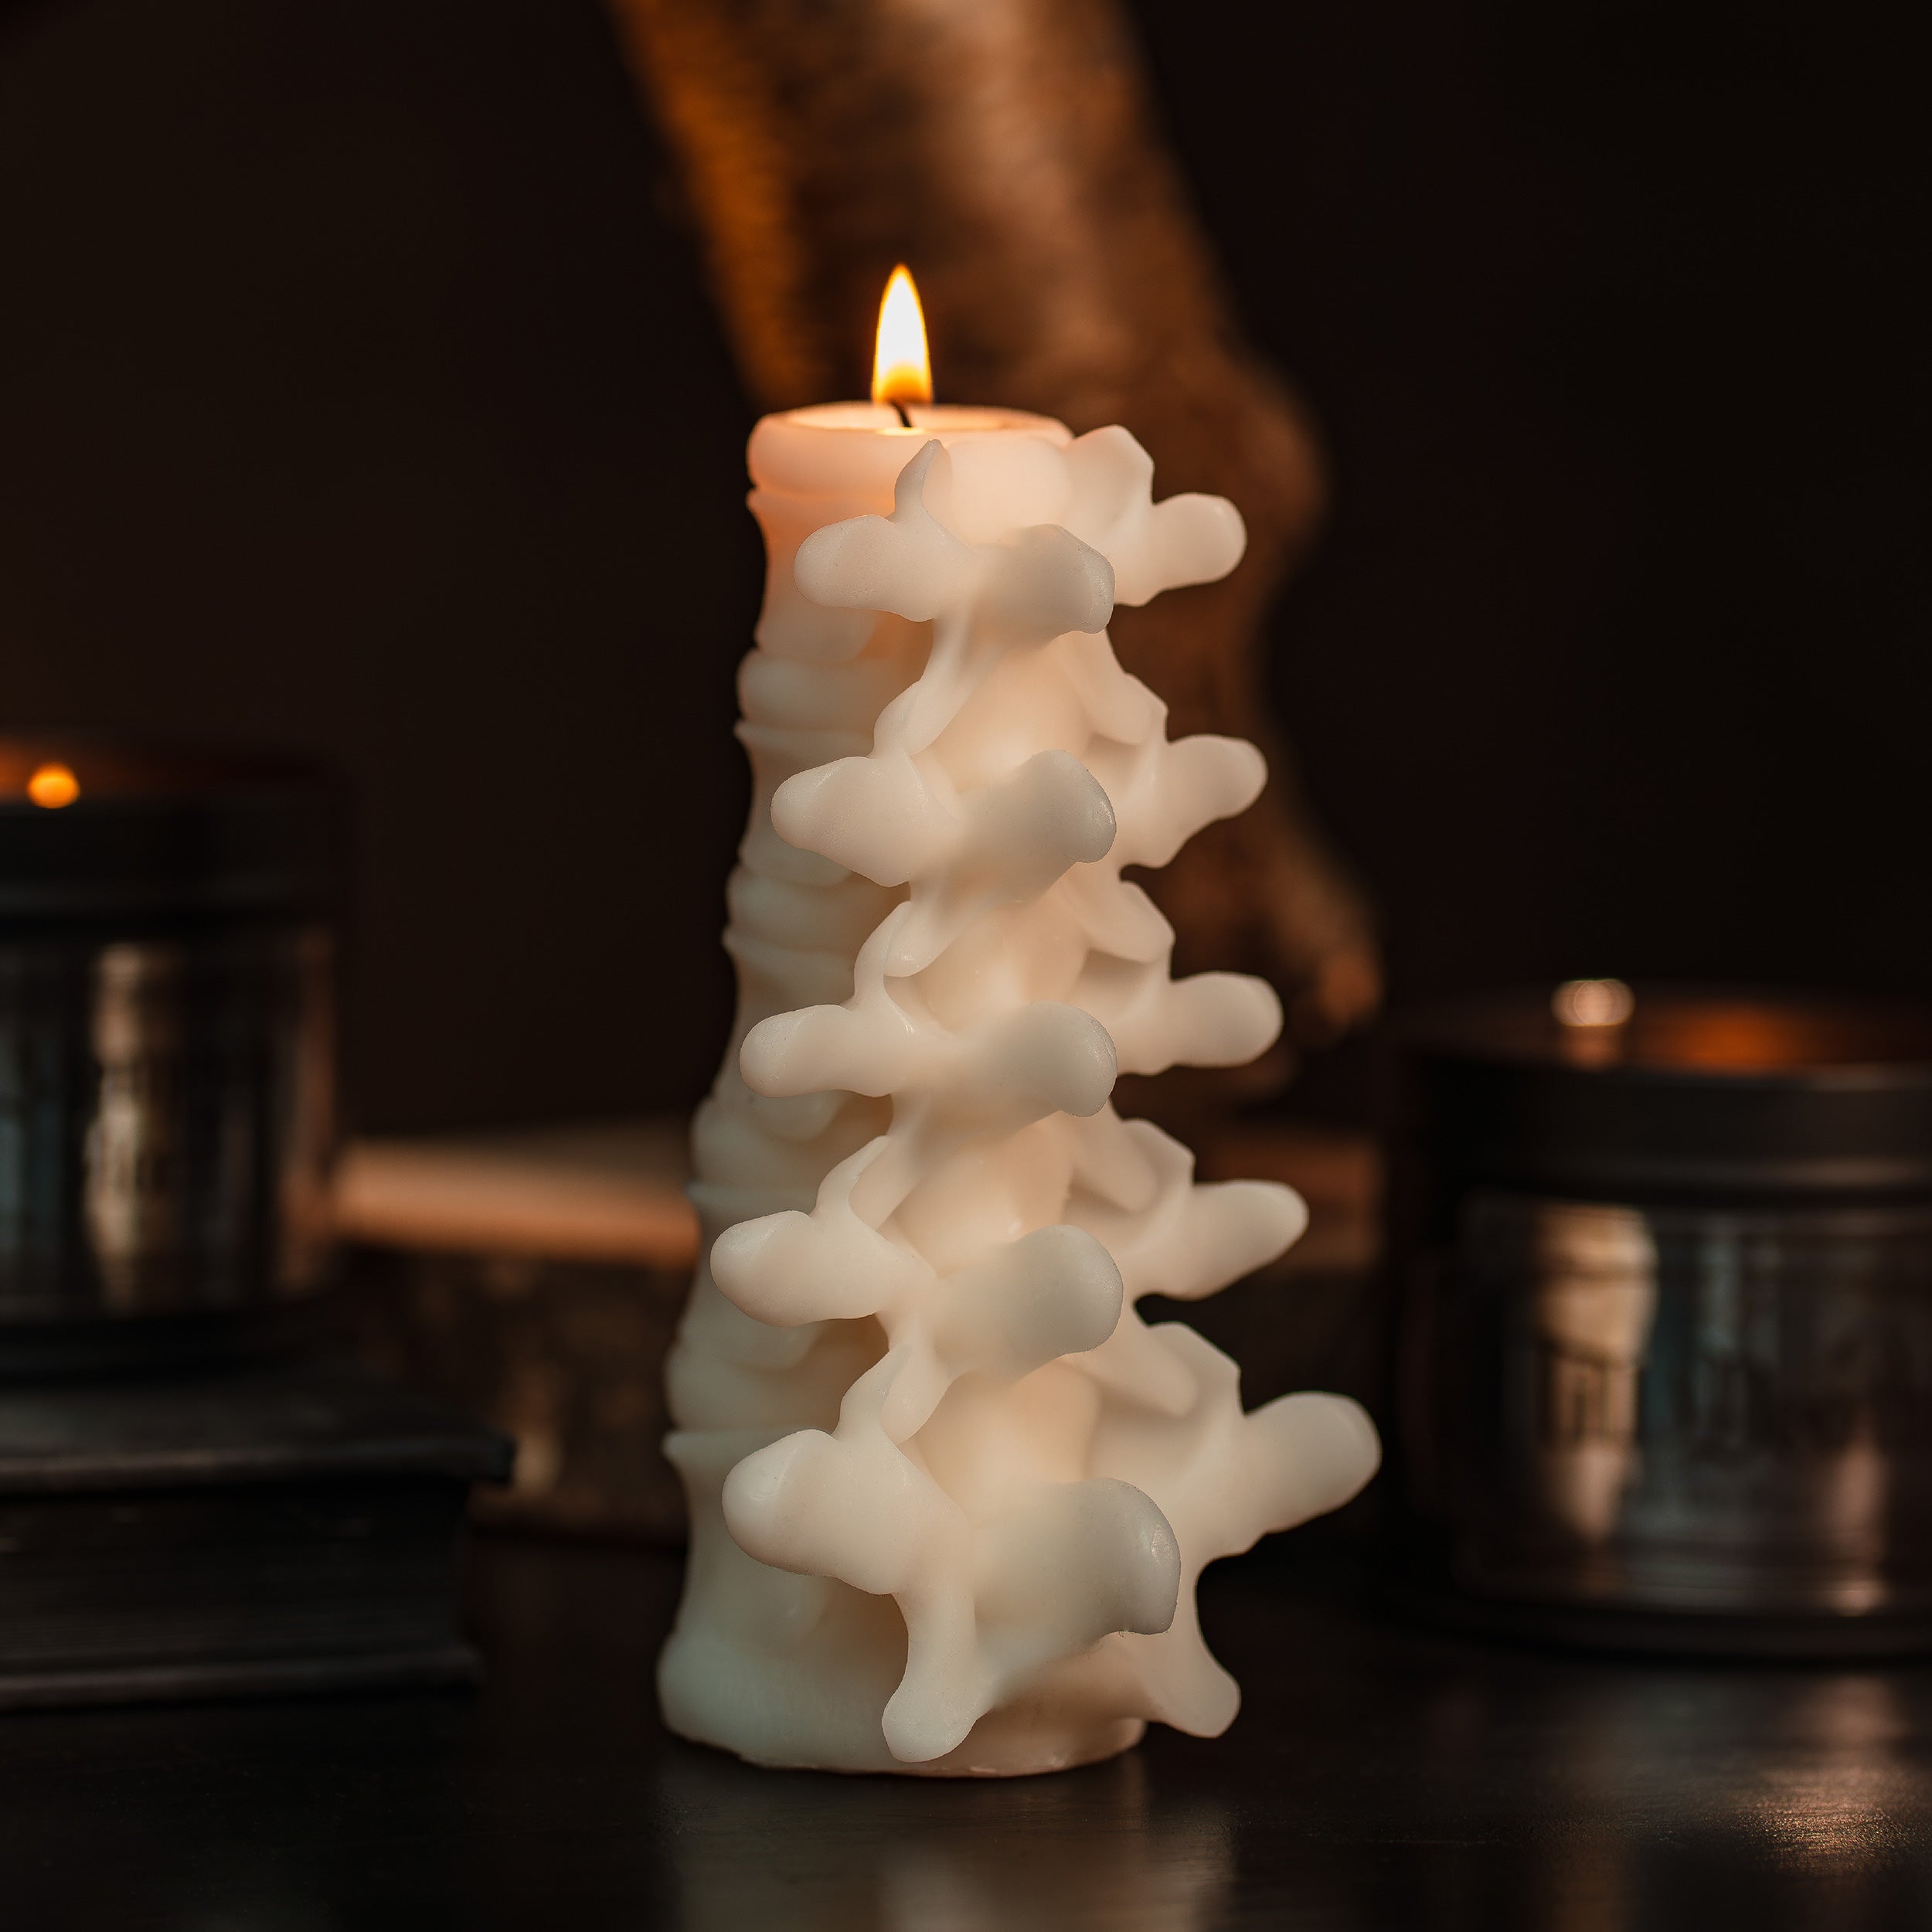 spine candle ossuary candle the blackened teeth gothic candles gothic home decor